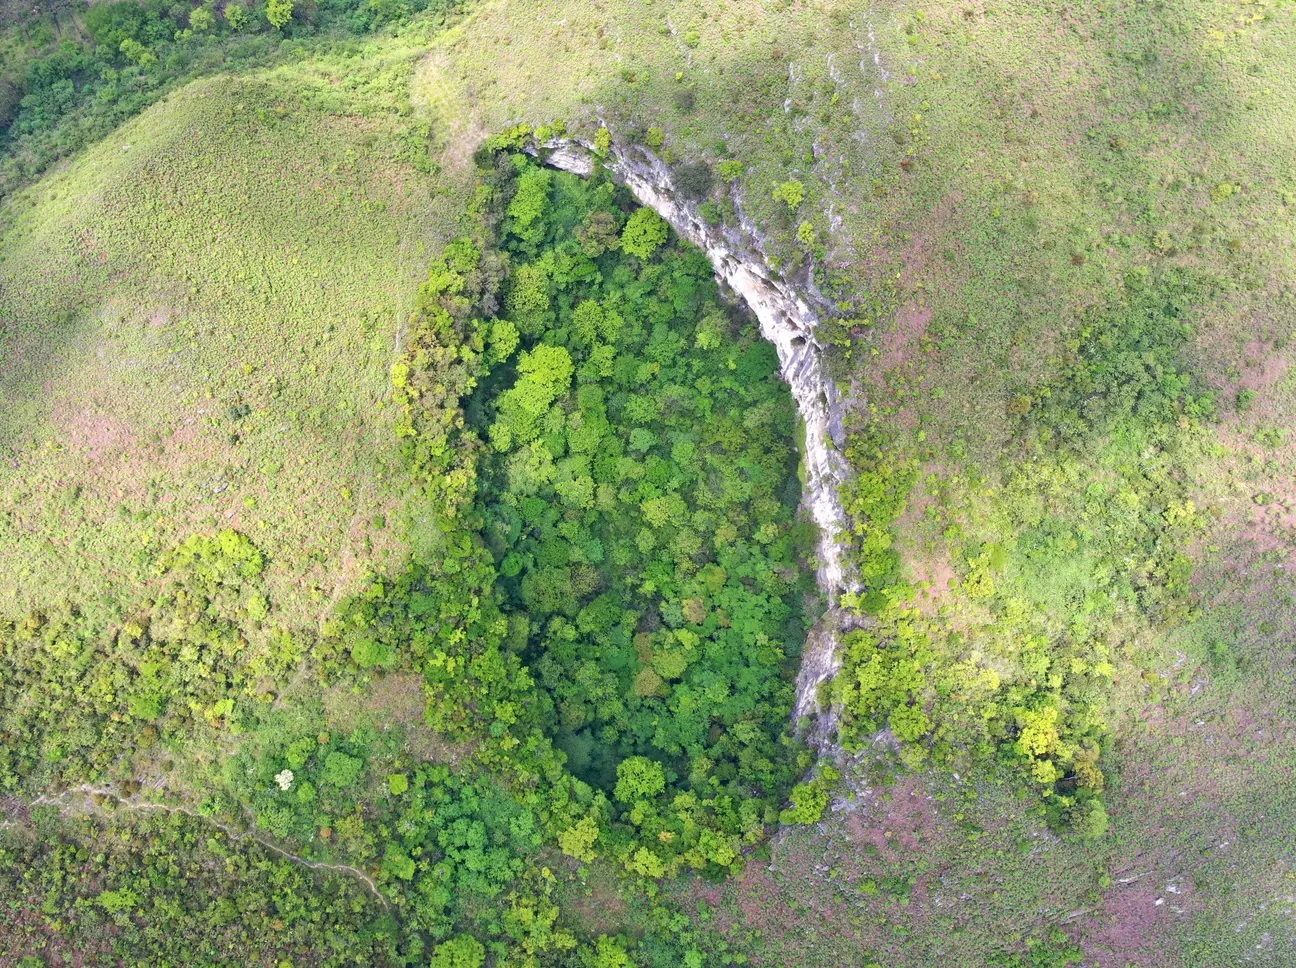 A Massive Sinkhole with Ancient Forest May Reveal Undiscovered Species